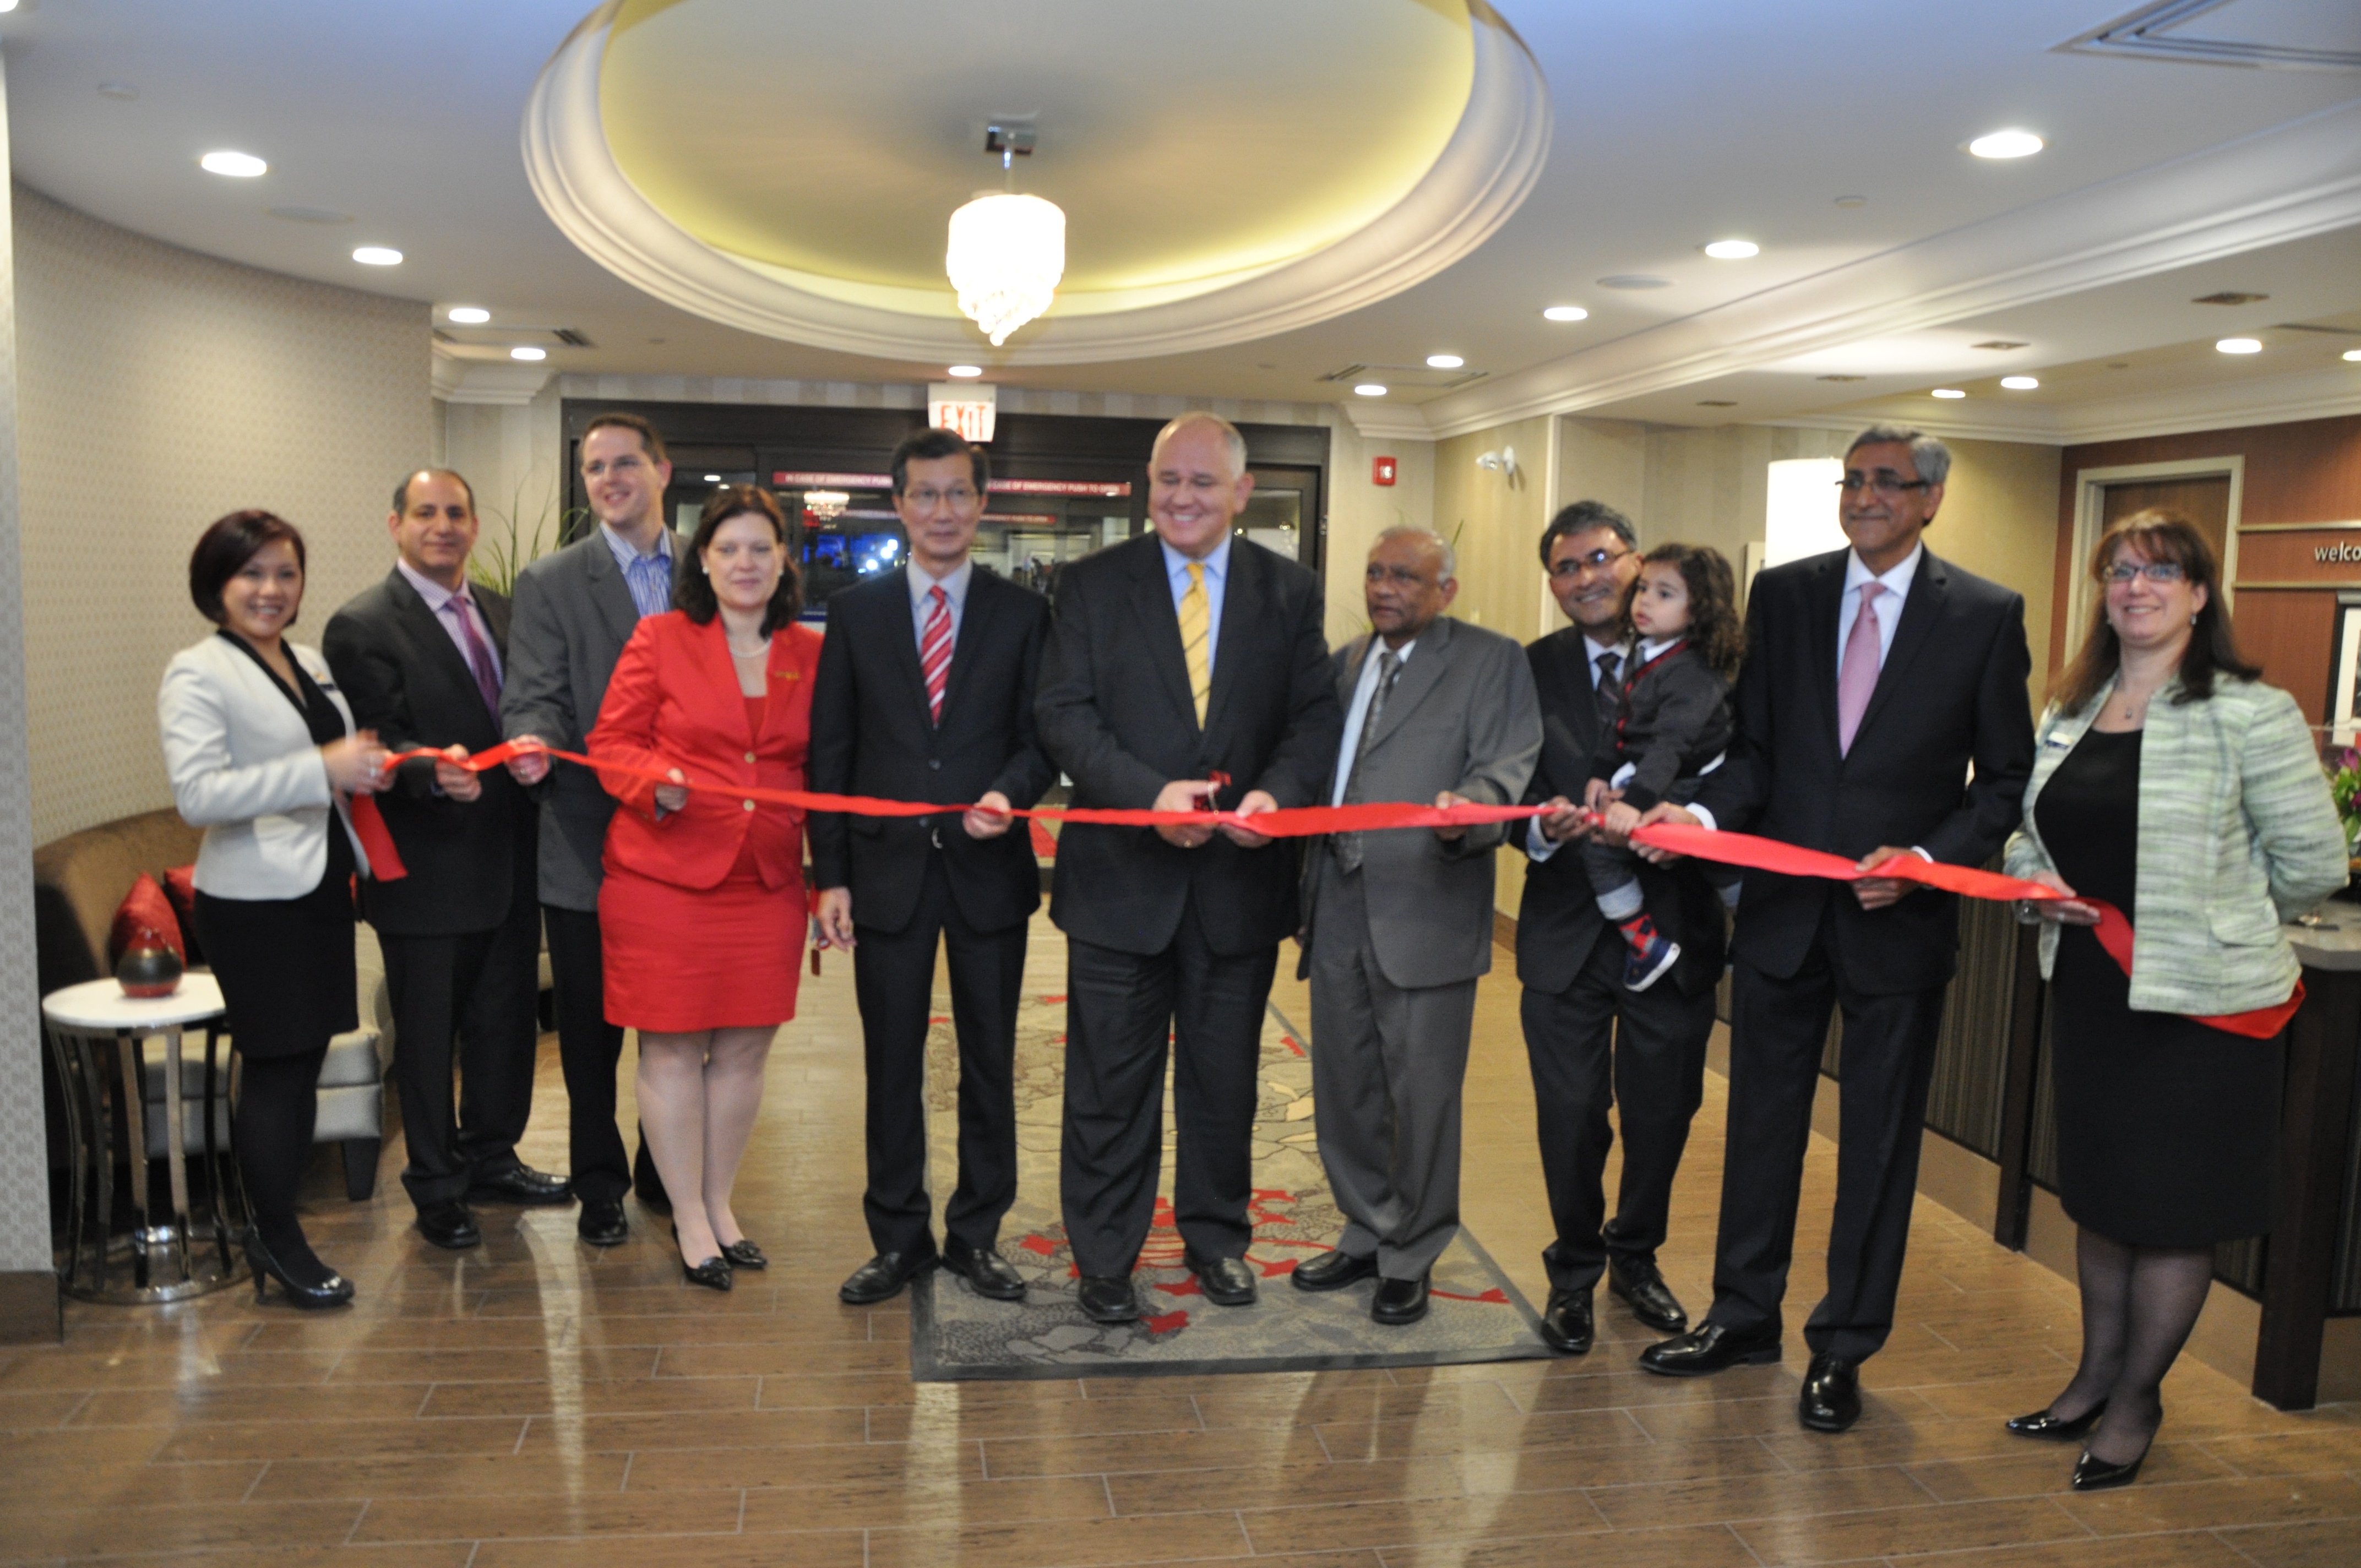 Jm Hospitality Inc Official Opening Of The Hampton Inn Suites